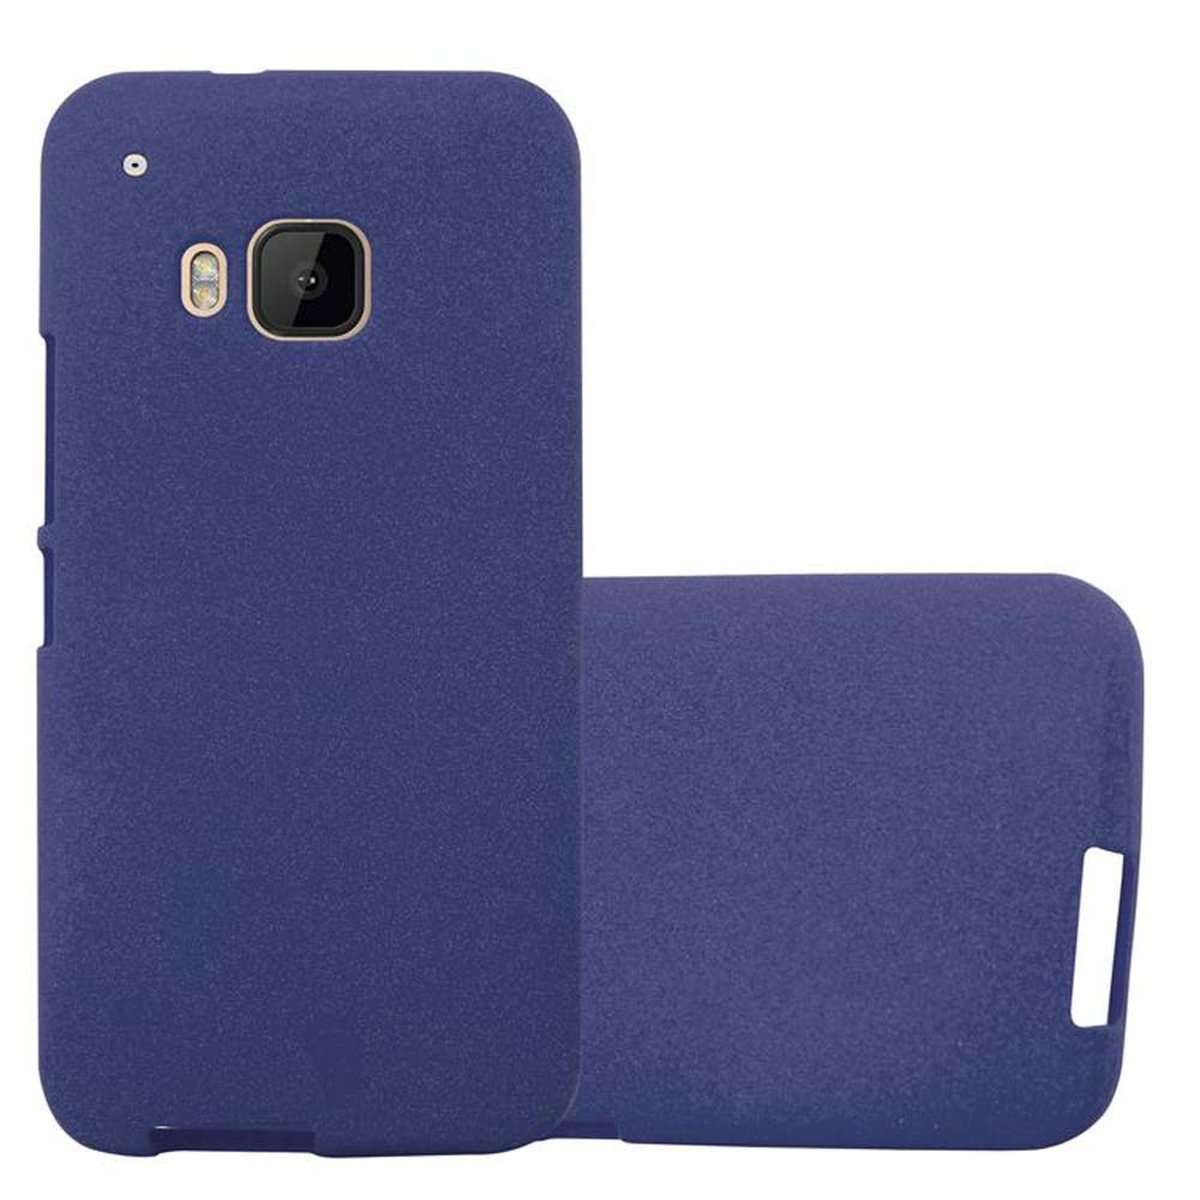 Backcover, DUNKEL Schutzhülle, TPU HTC, FROST ONE BLAU Frosted CADORABO M9,